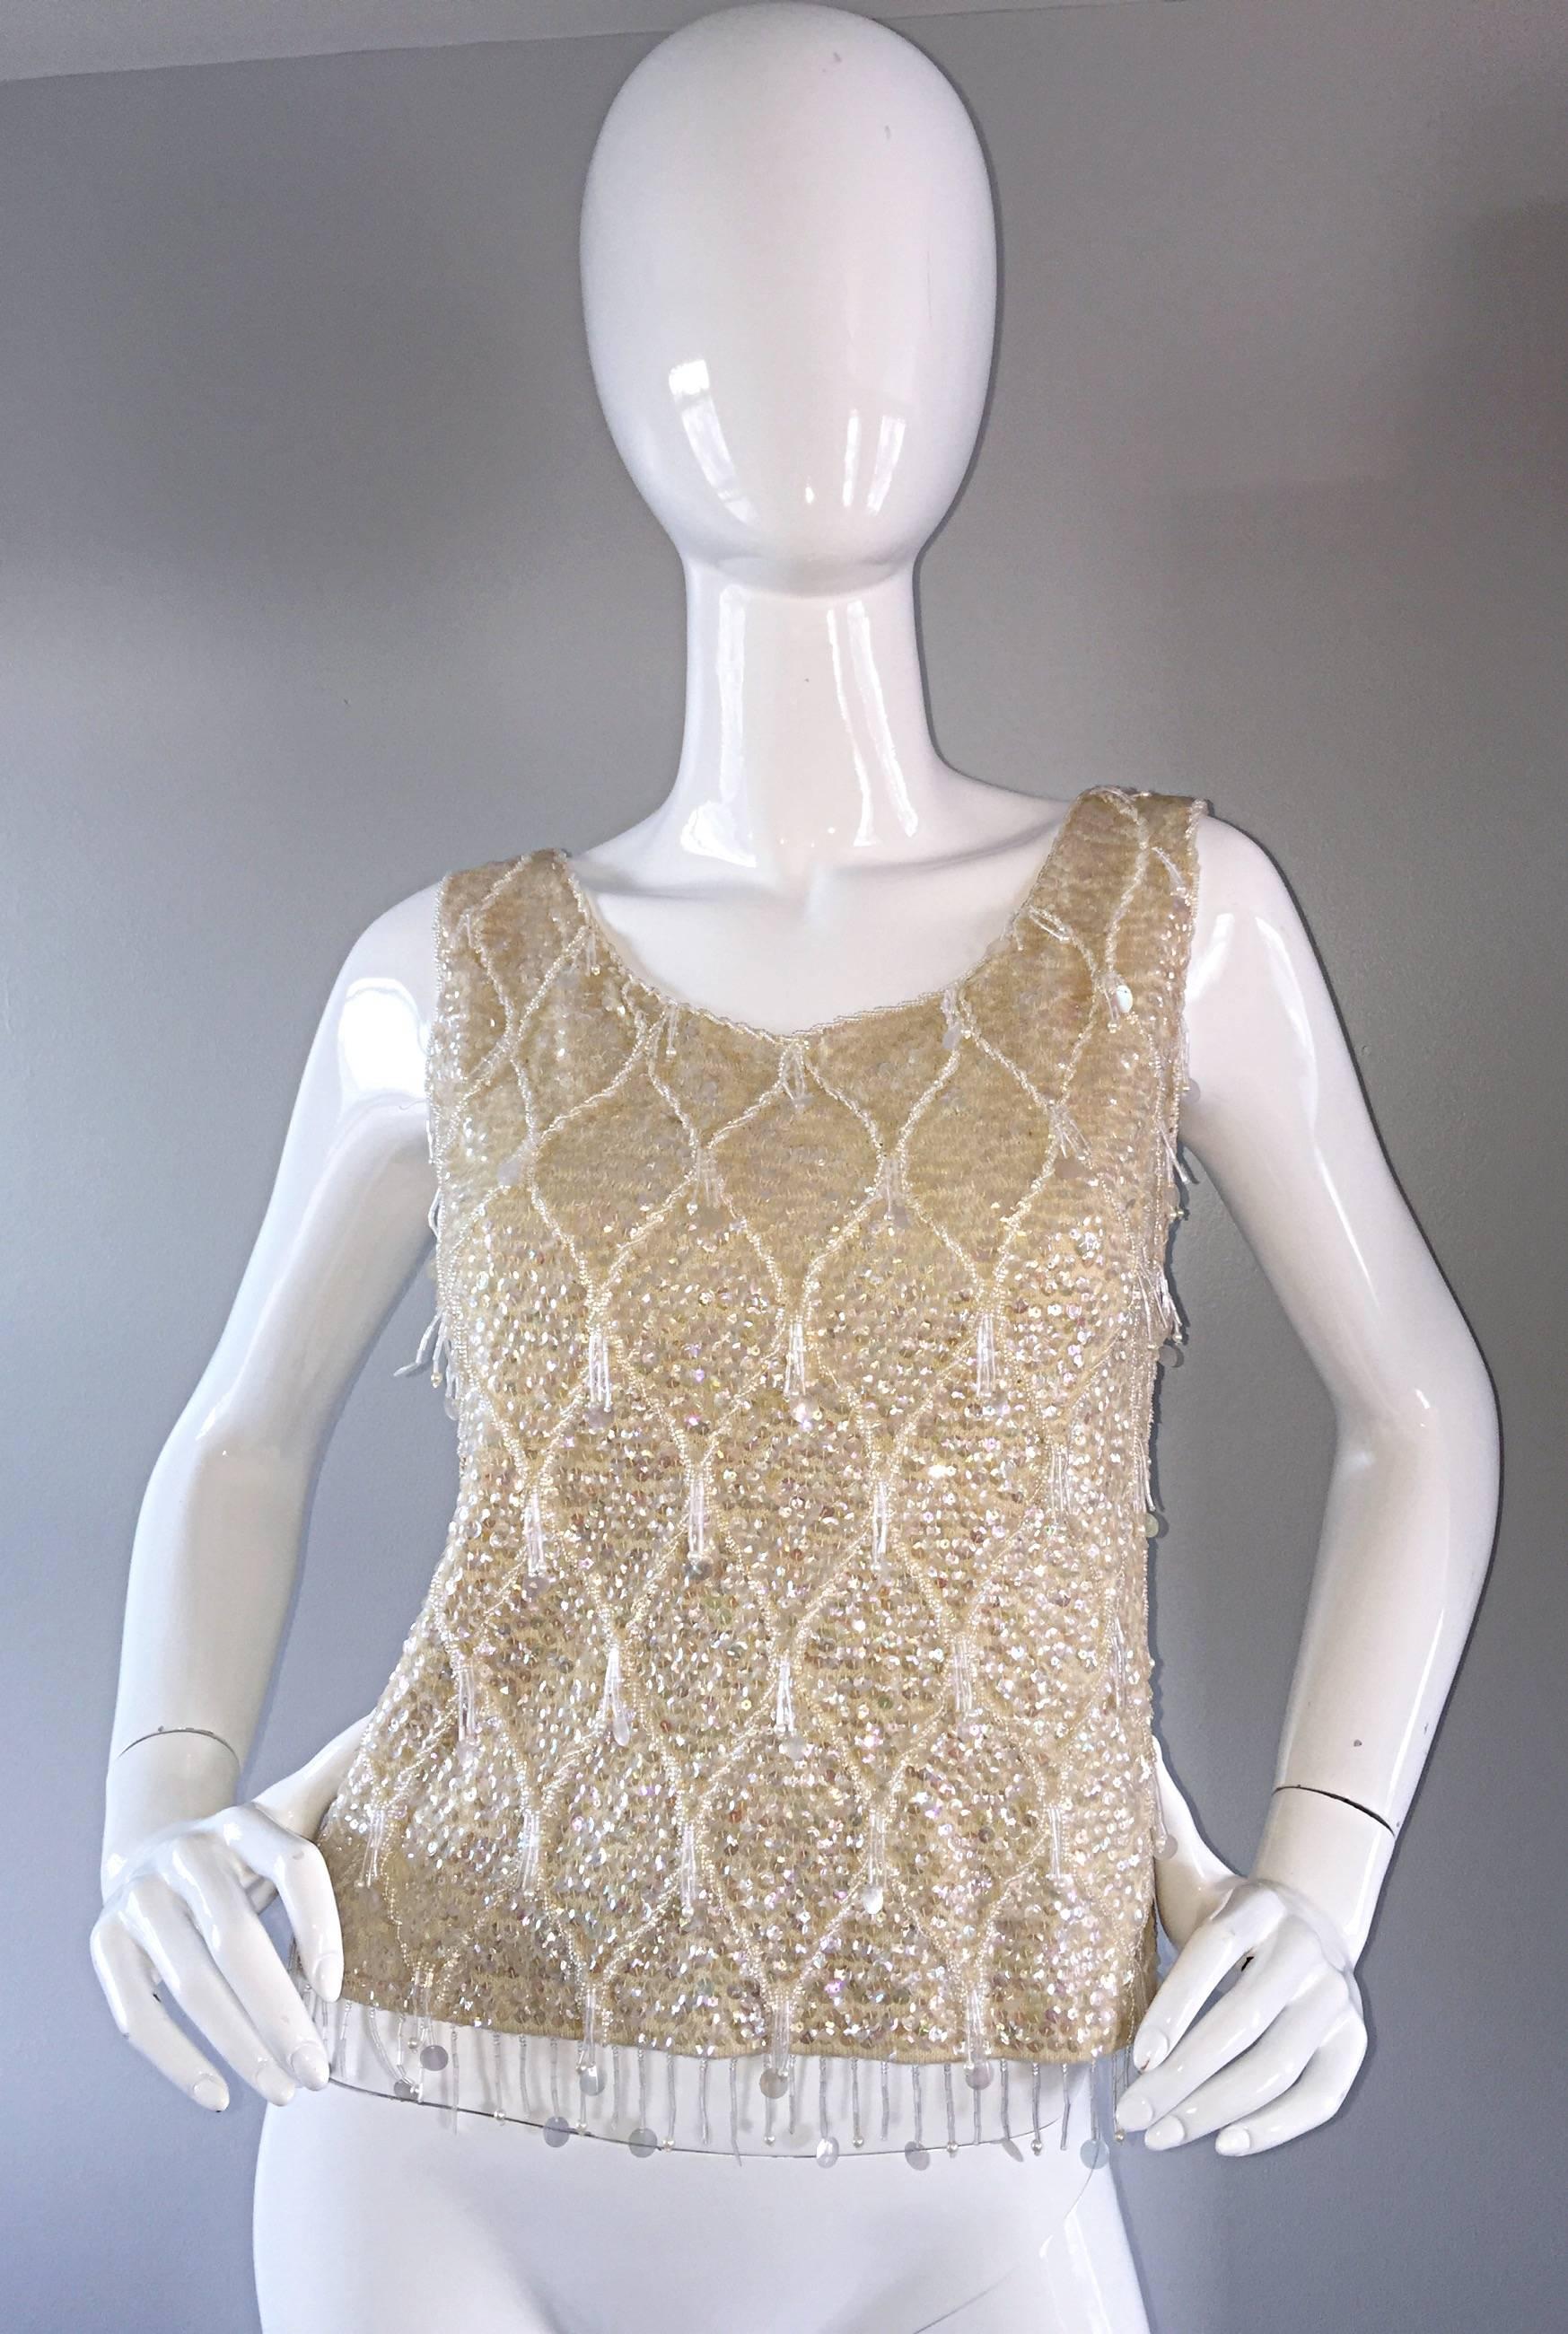 Amazing late 50s / early 60s ivory  wool beaded (and sequined) sleeveless sweater! Thousands of hand-sewn sequins throughout, with dangling beads at each crest. So much detail, and expert craftsmanship...not your typical vintage beaded jumper! Full